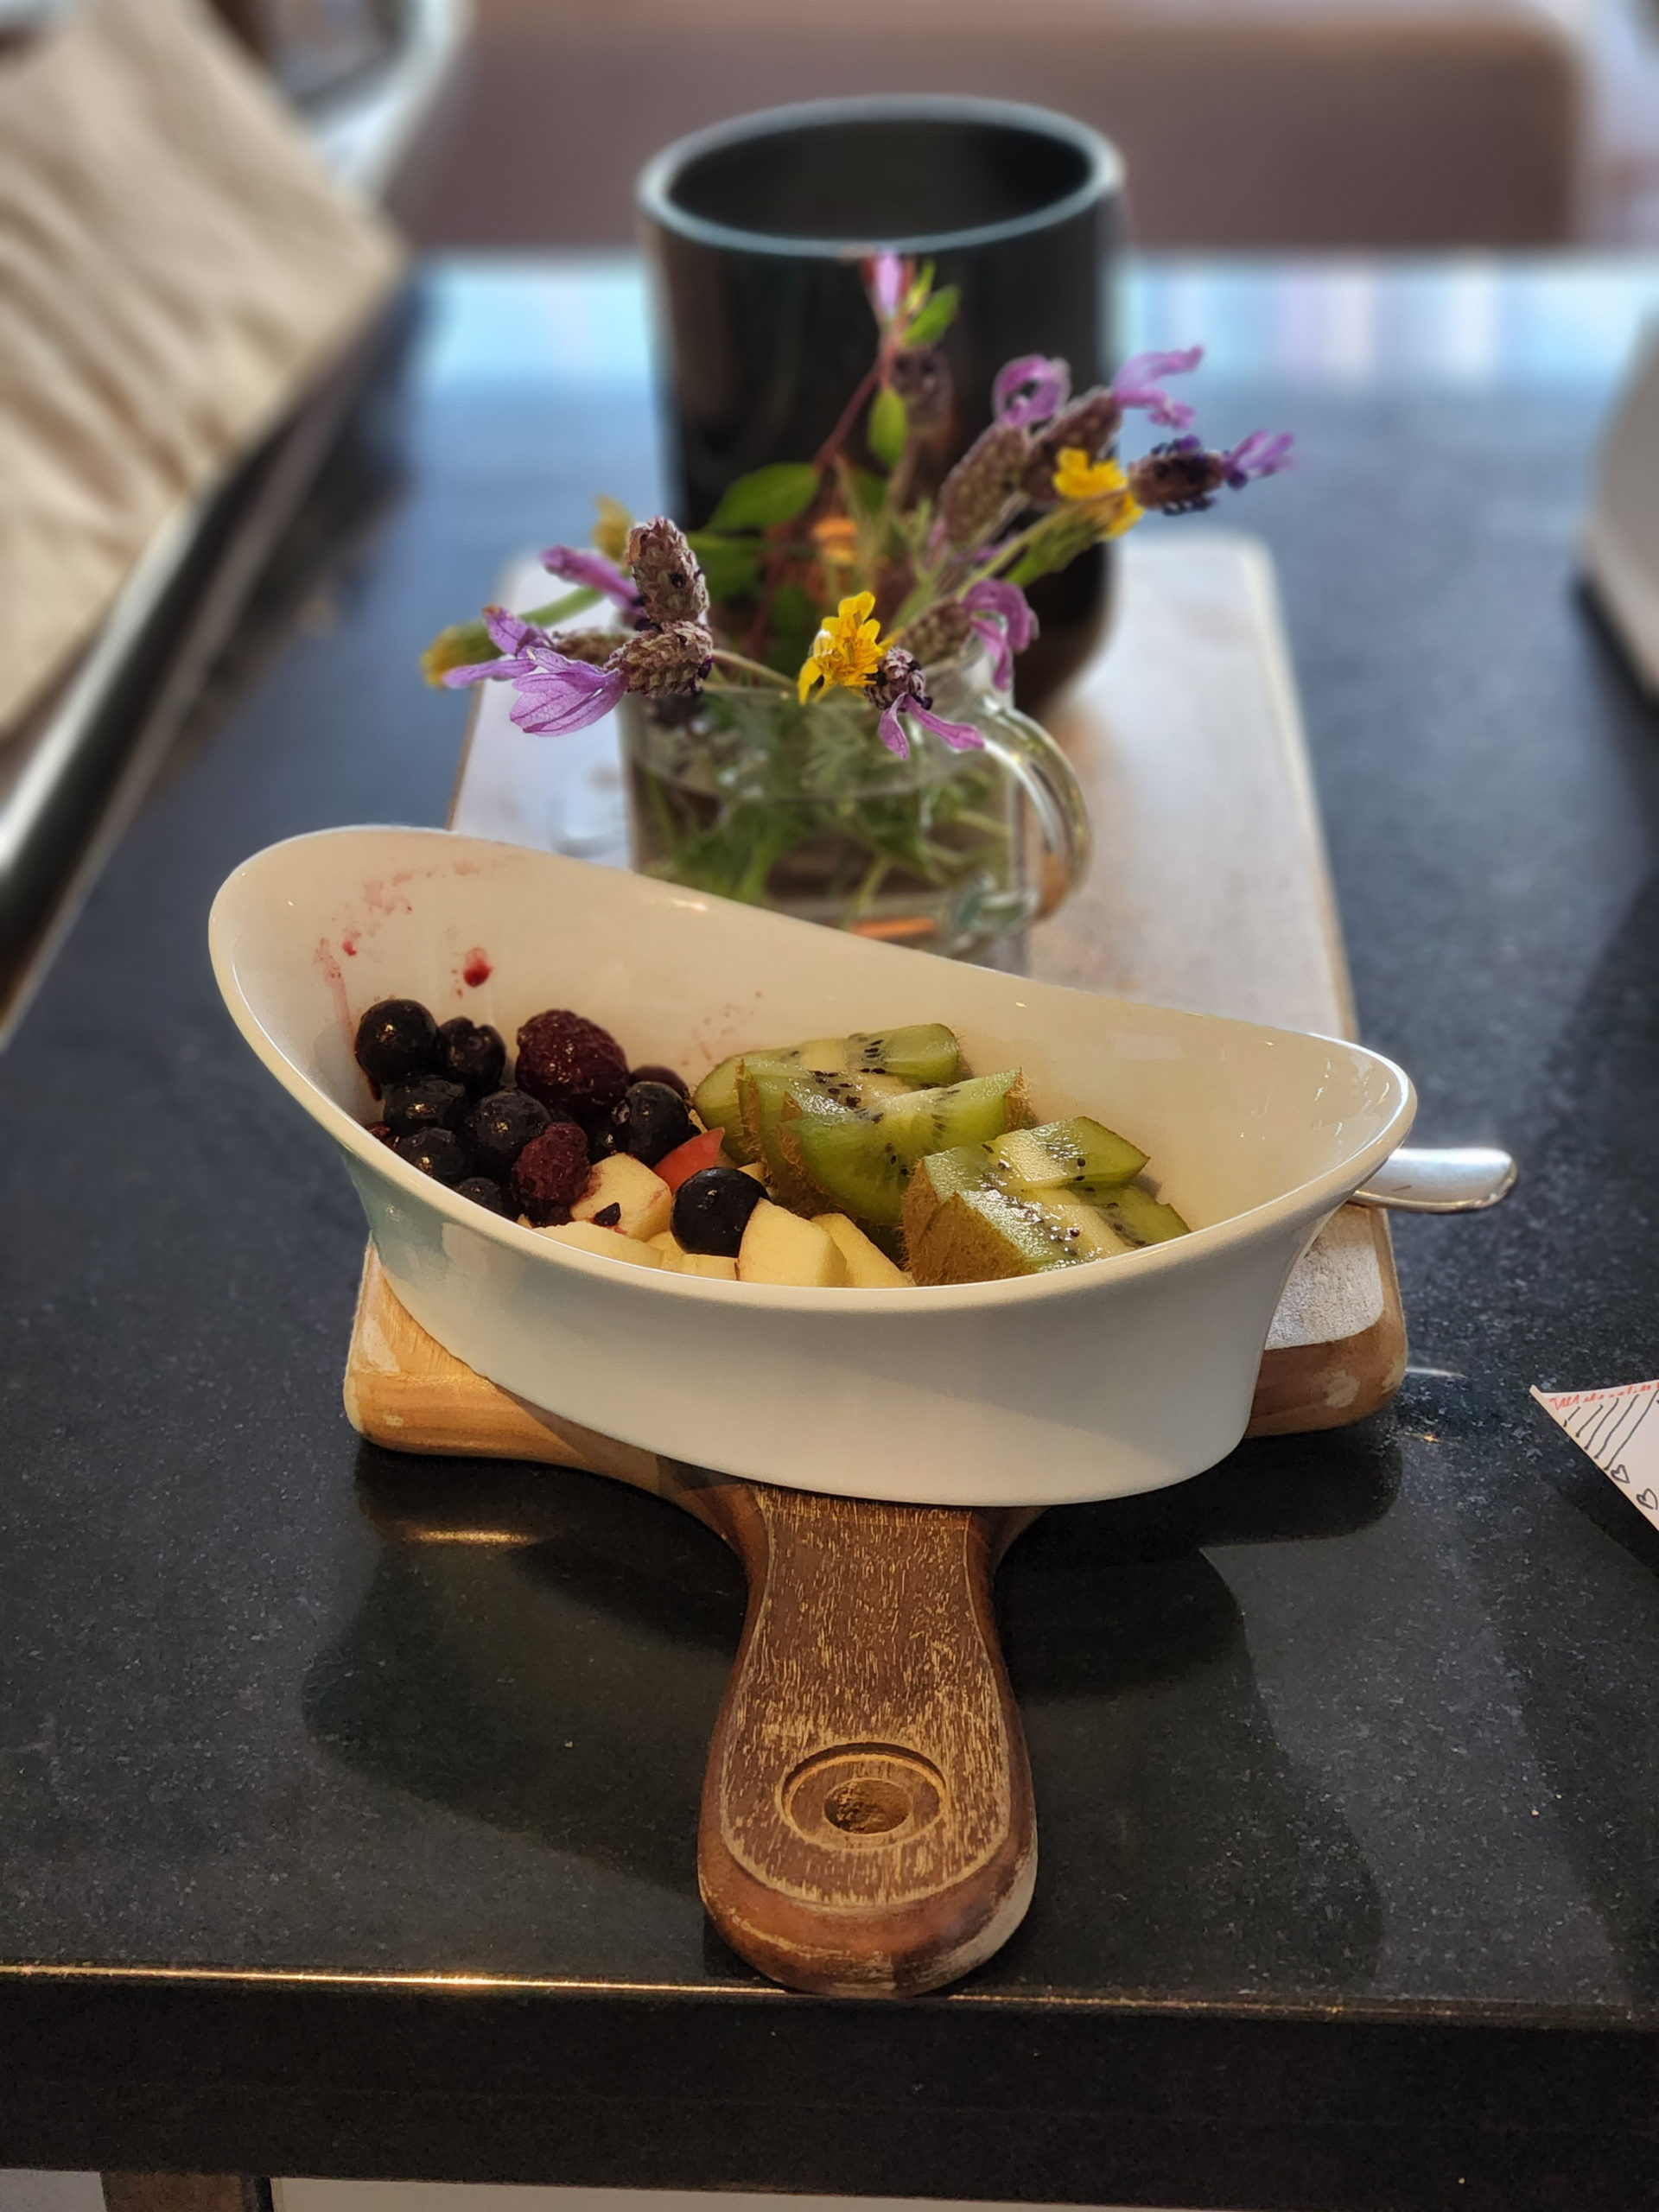 A bowl of sliced fruit on a wooden board in front of a vase and flowers and a candle.